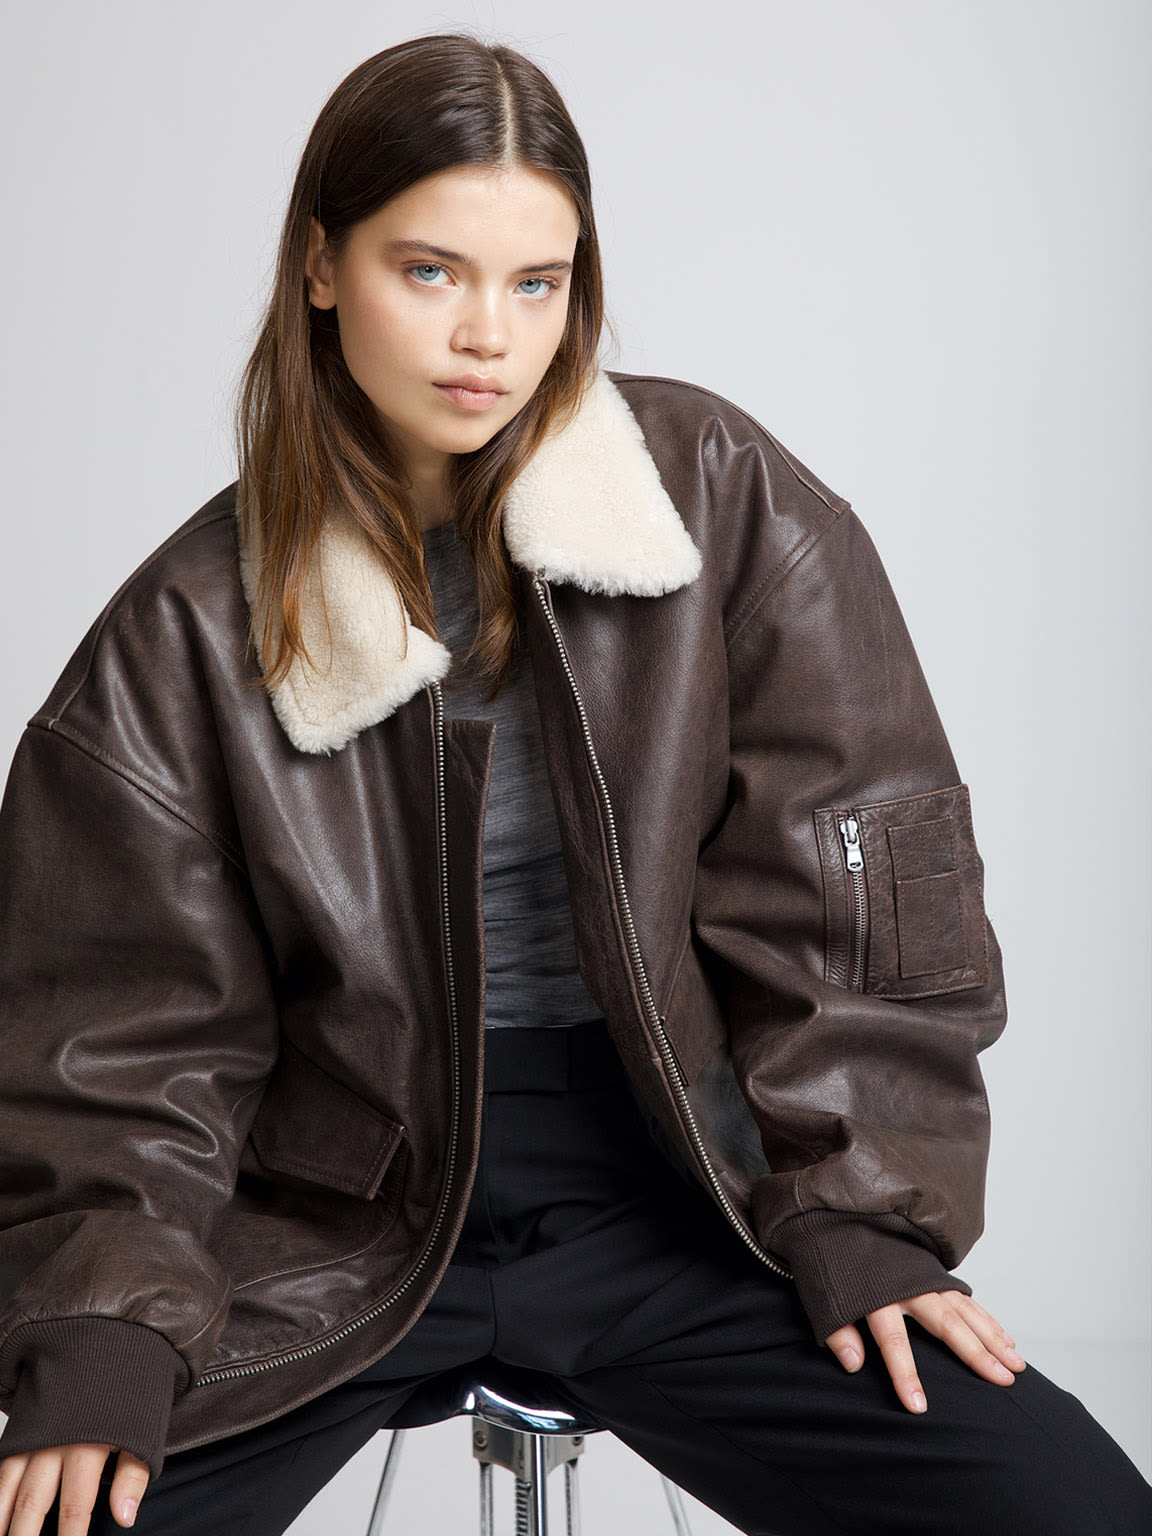 CLYDE BOMBER - SHEARLING